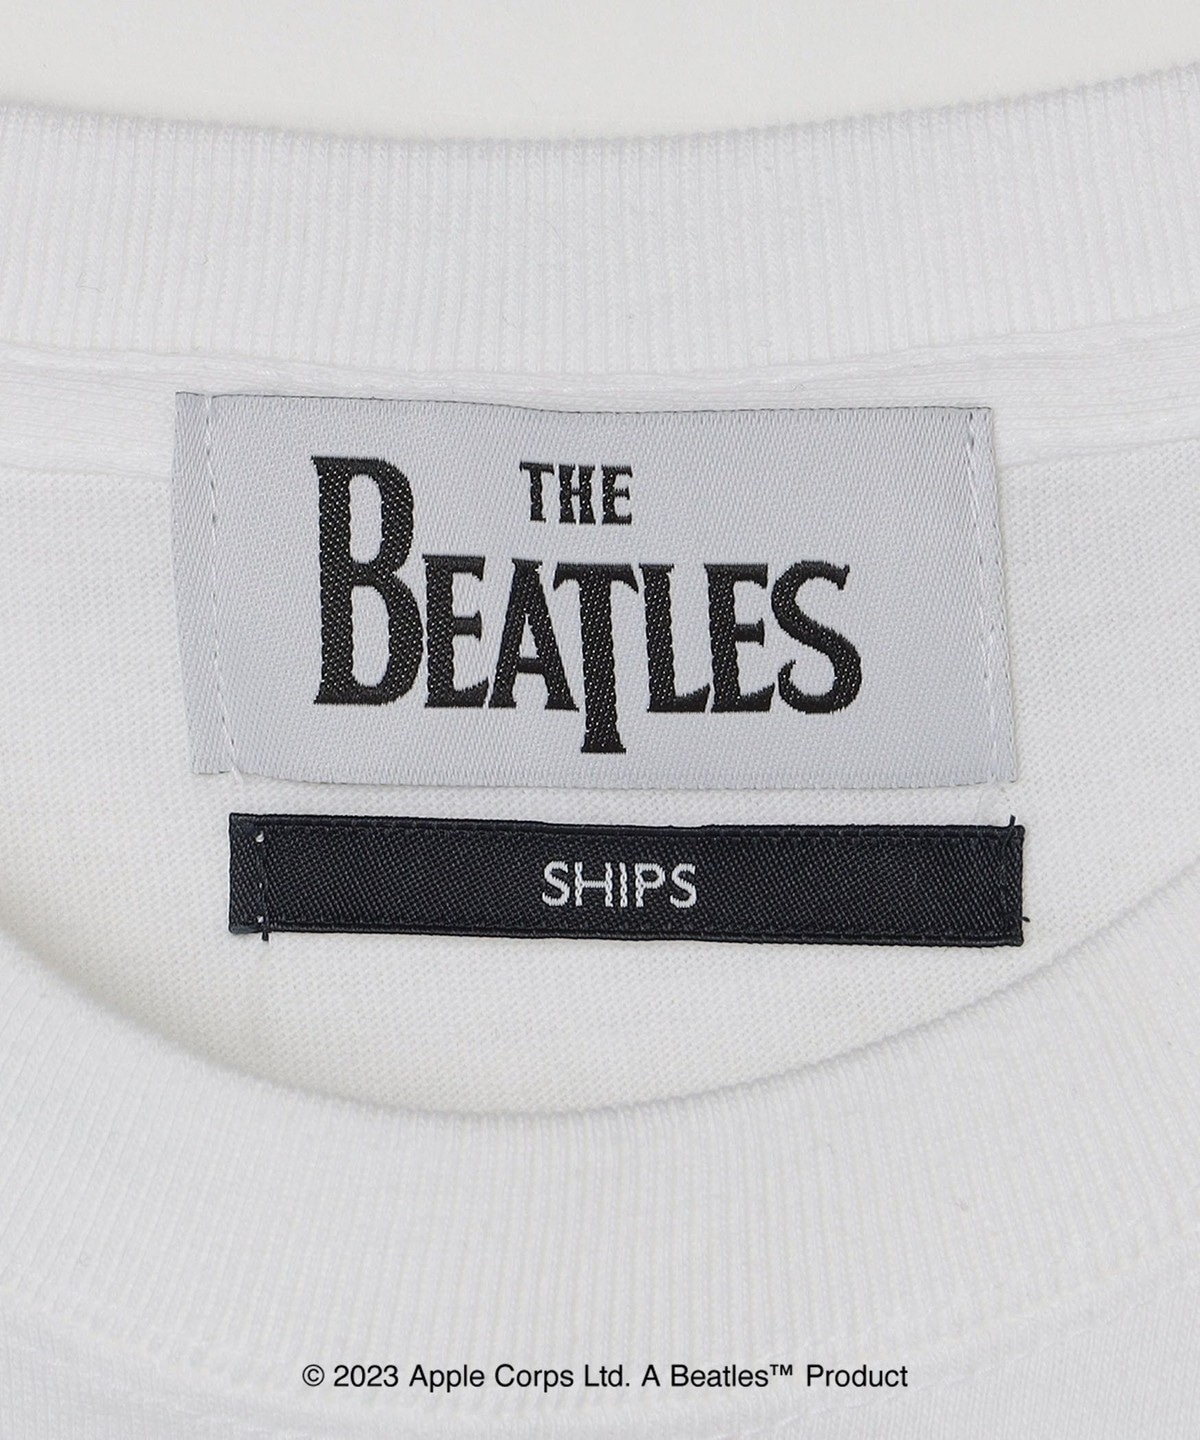 SHIPS: THE BEATLES コラボレーション マイクロ ロゴ ポケット Tシャツ